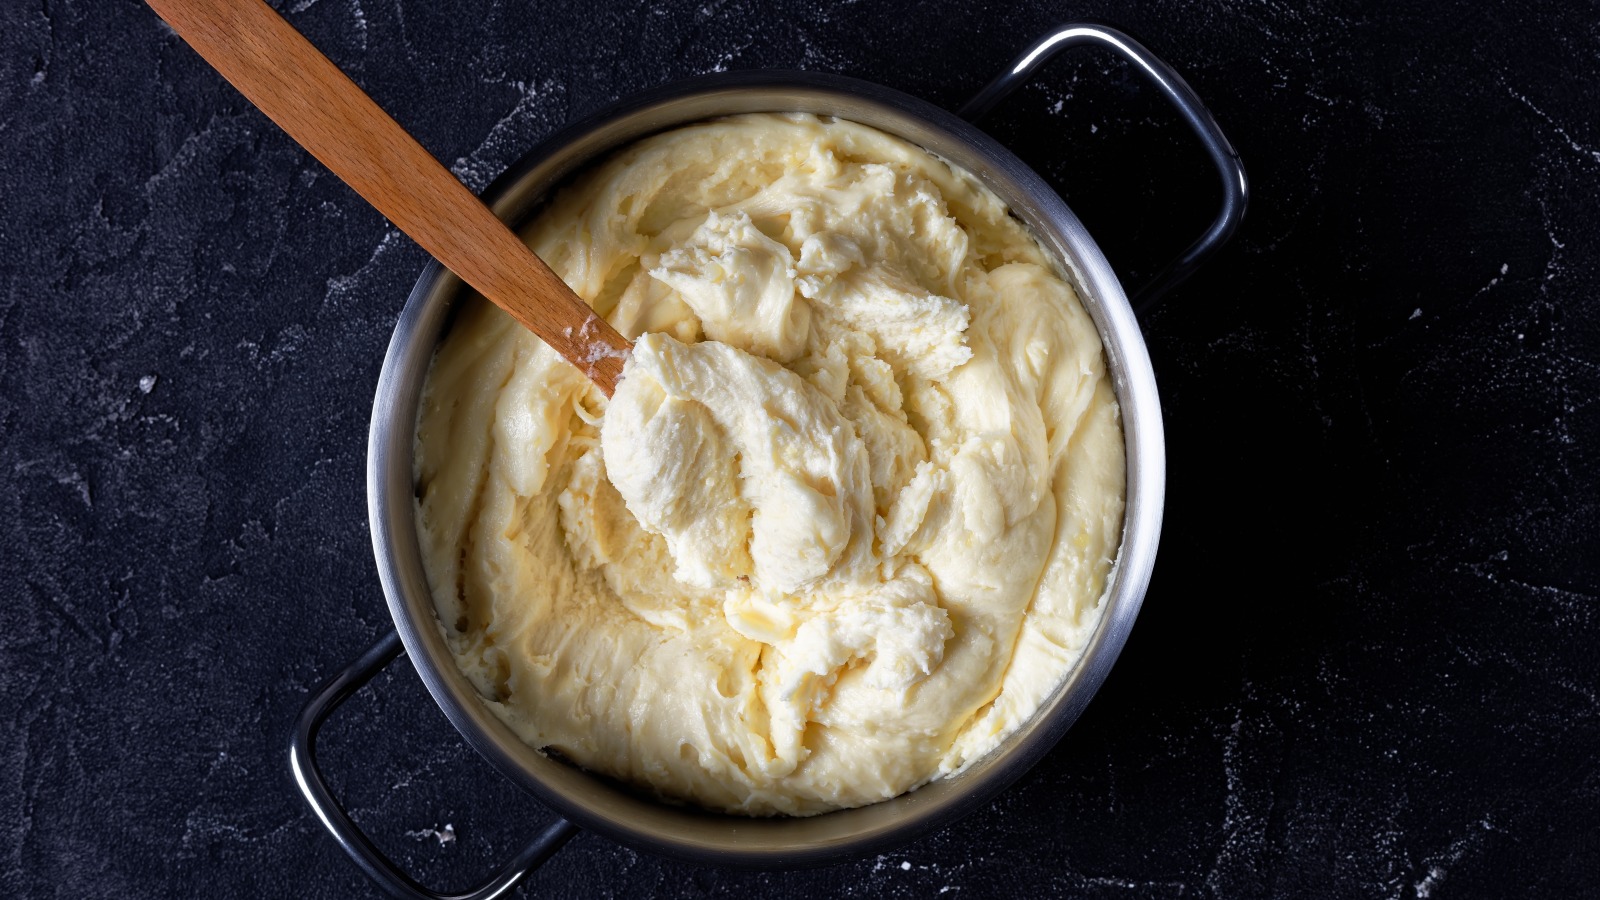 How To Make Mashed Potatoes Without A Mixer